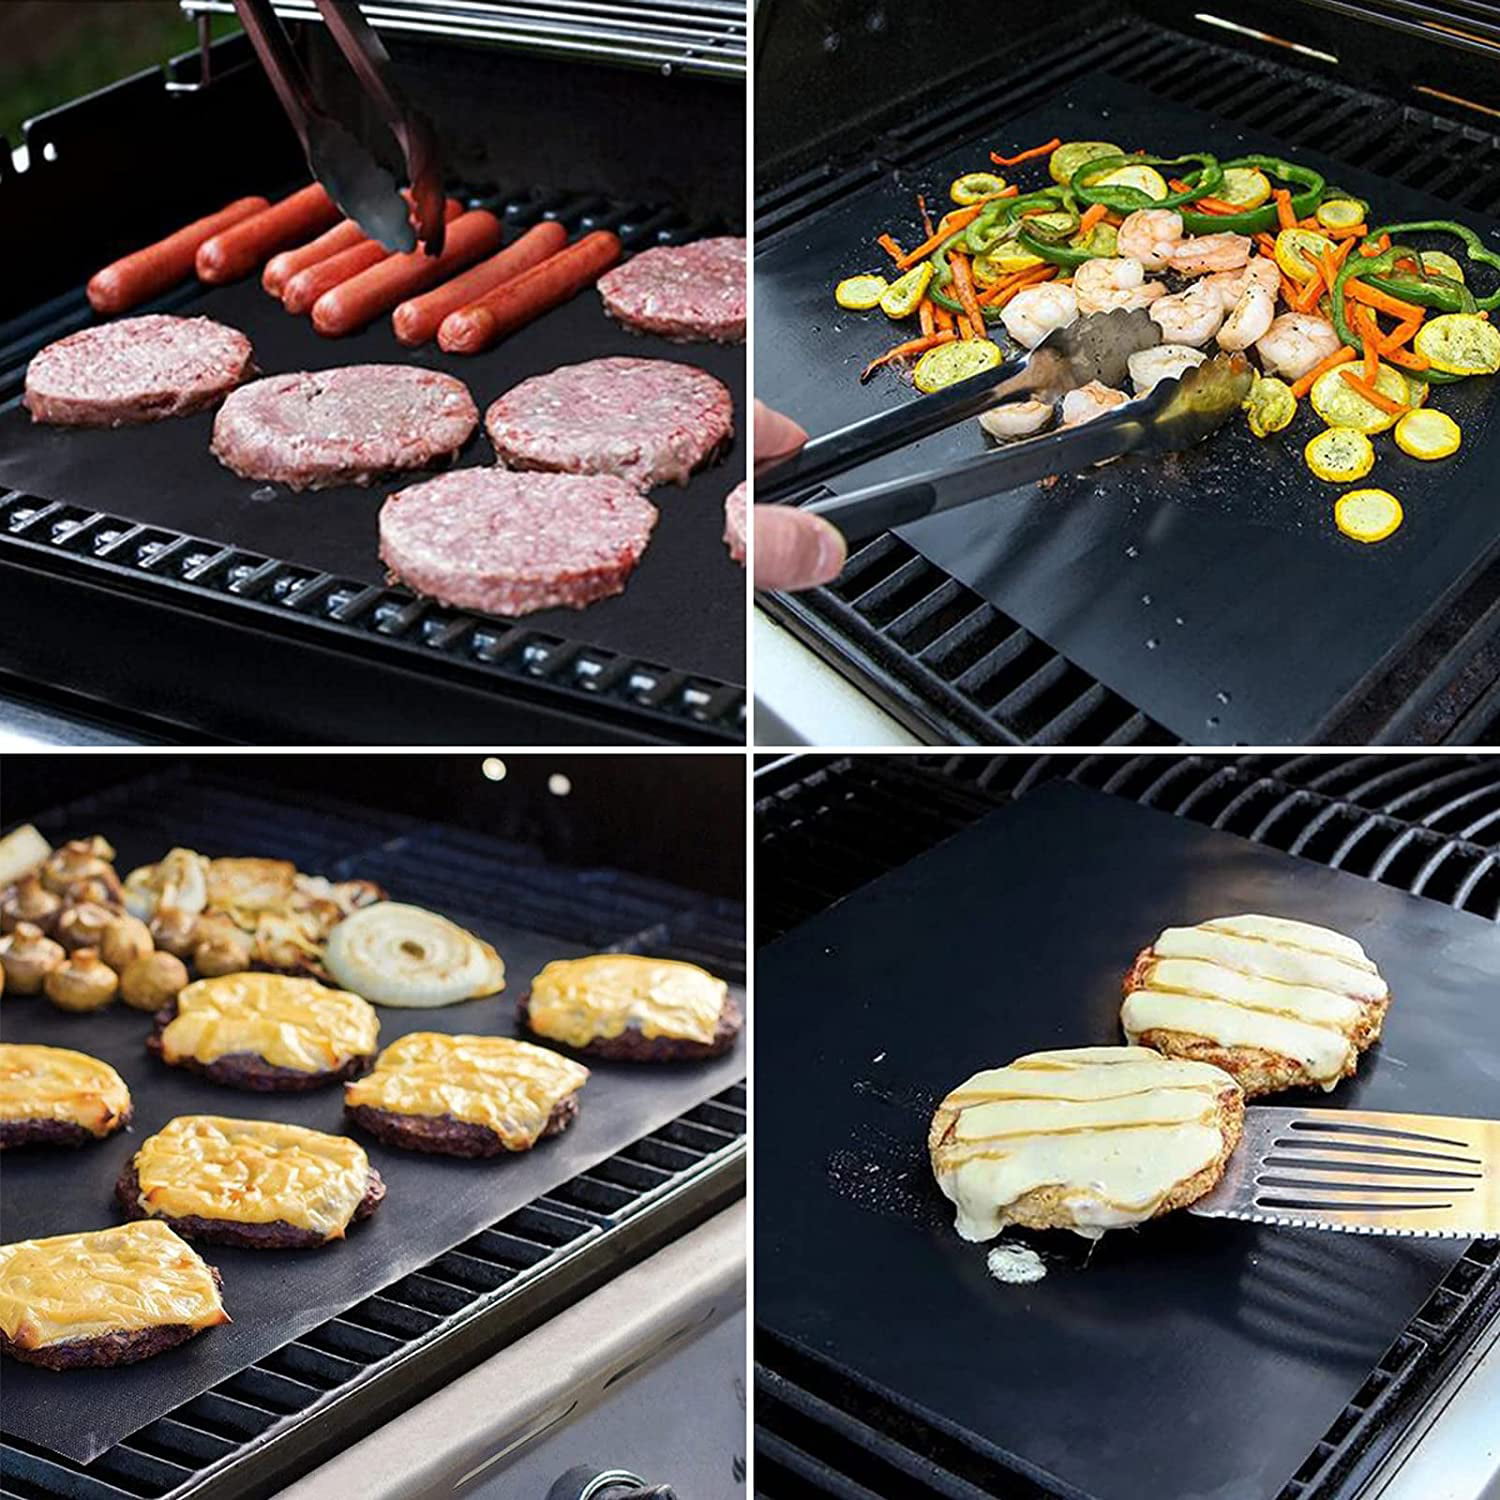 Non-Stick BBQ Grill Mats Durable,Reusable,Easy to Clean Timmenis Grill Mat Set of 6 BBQ Mats for Barbecue Grilling & Baking,Electric Grill Gas Charcoal BBQ, 